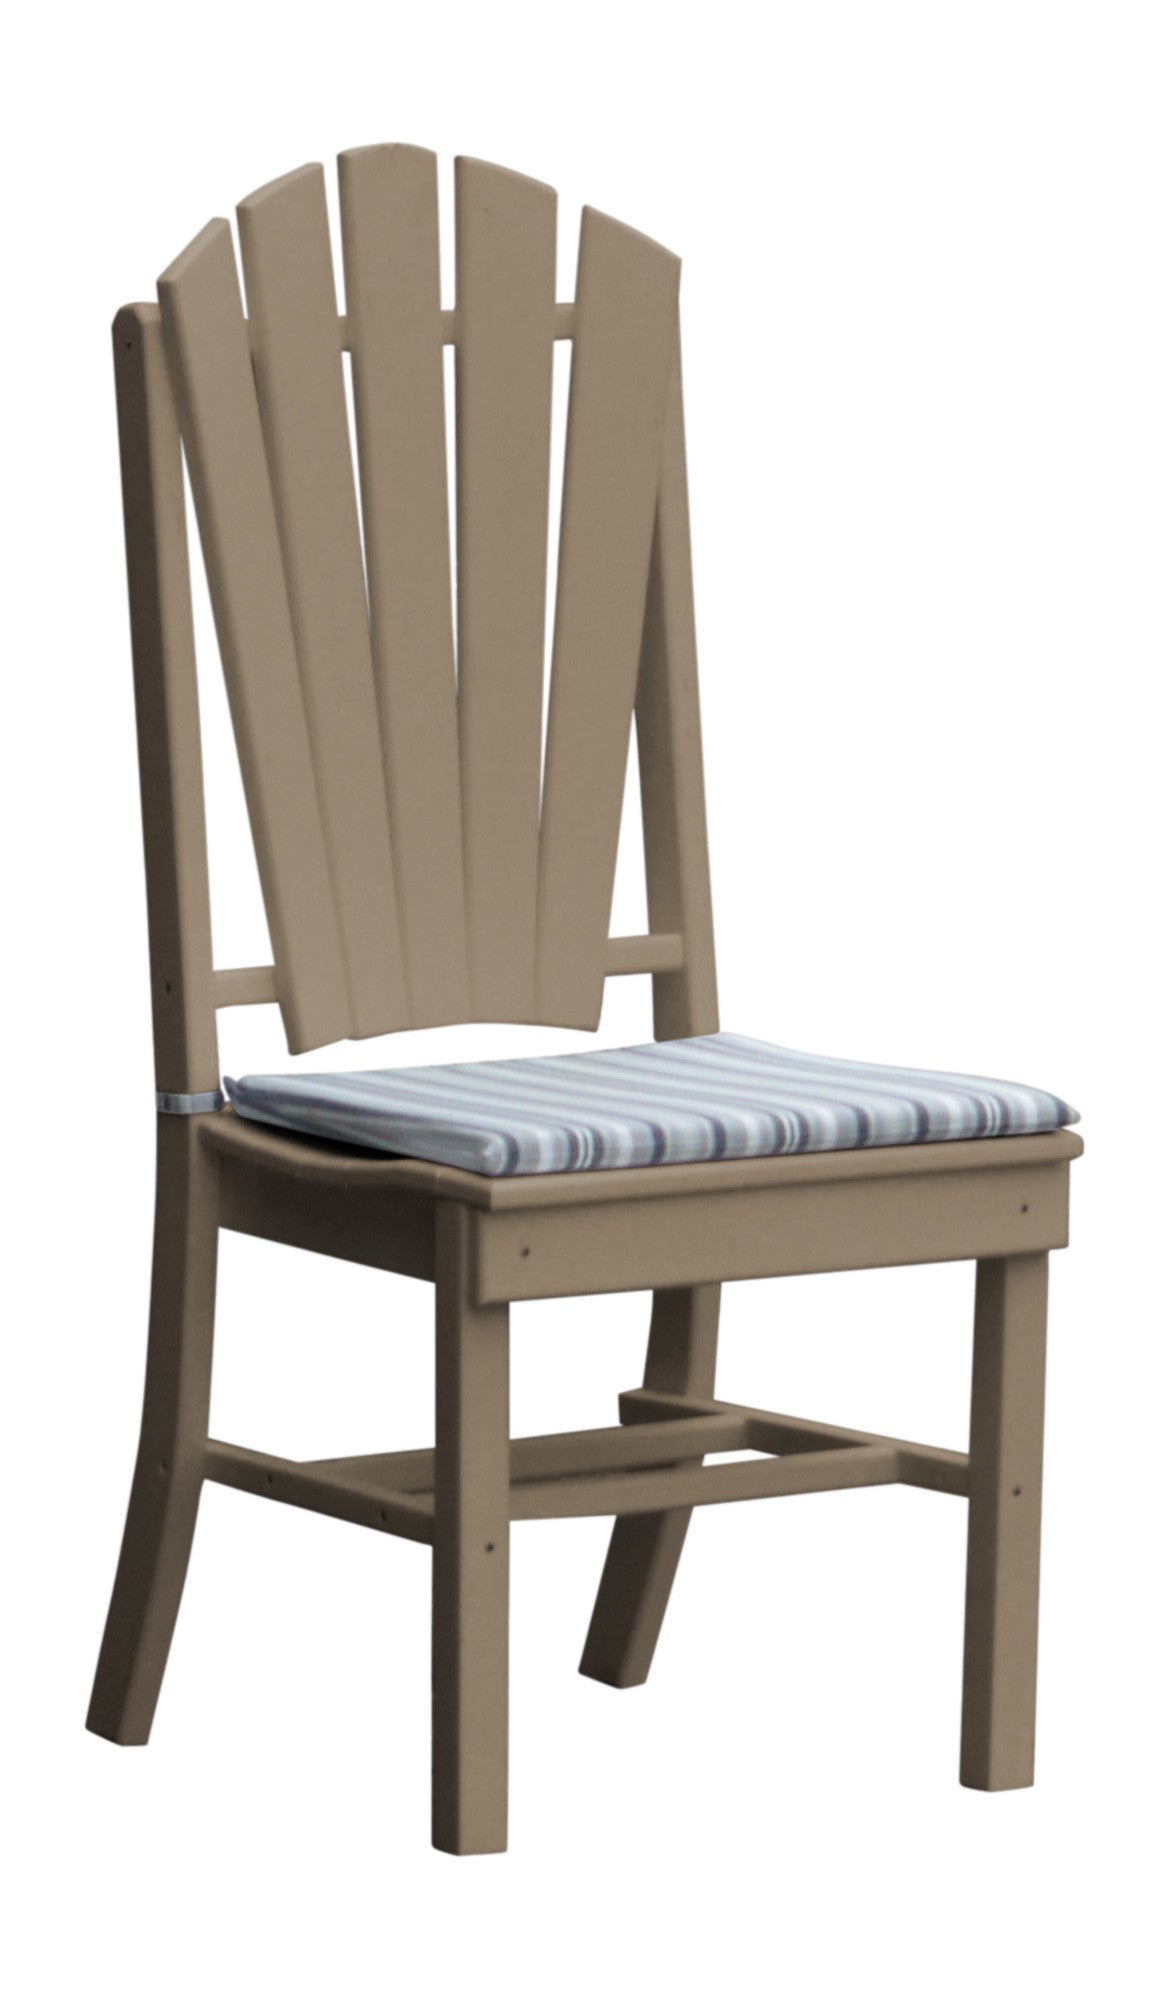 A&L Furniture Company Recycled Plastic Adirondack Dining Chair - Weatheredwood